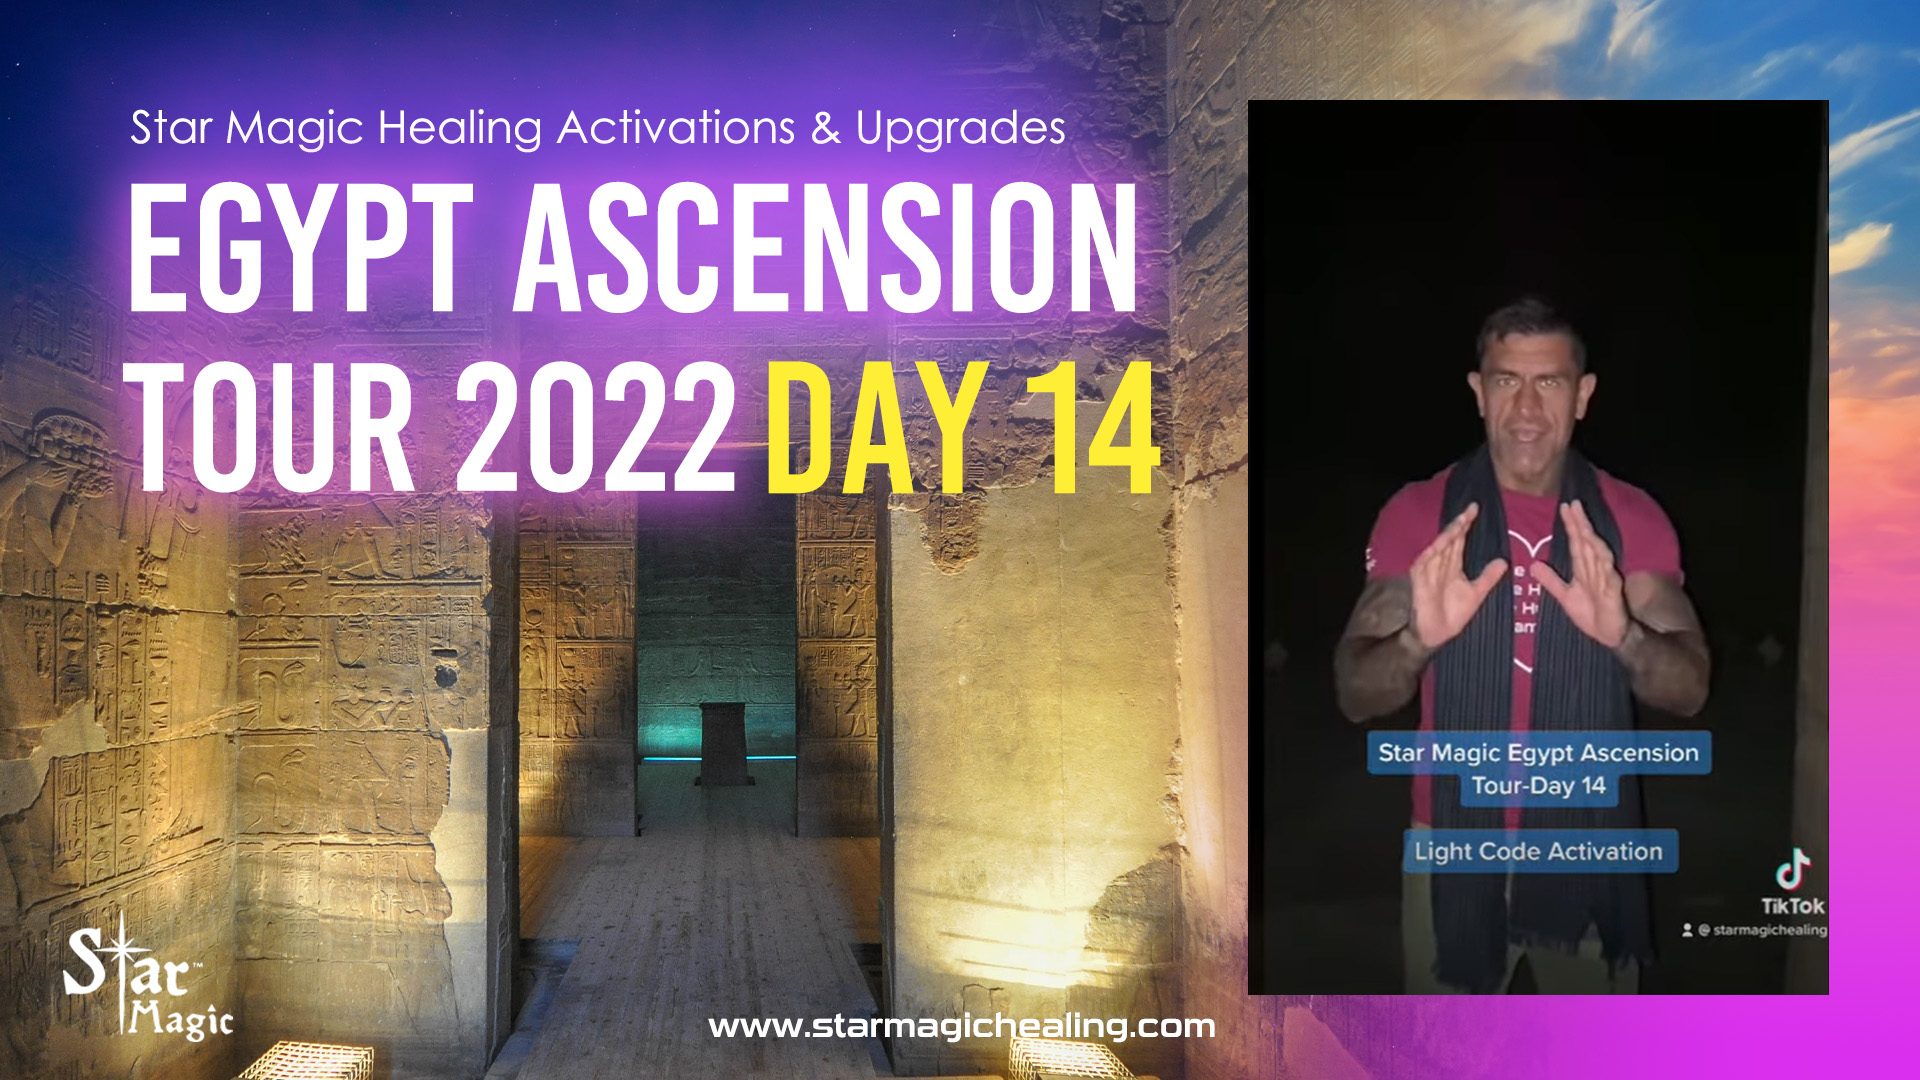 Star Magic Egypt Ascension Tour-Day 14 – Activations & Upgrades part 2